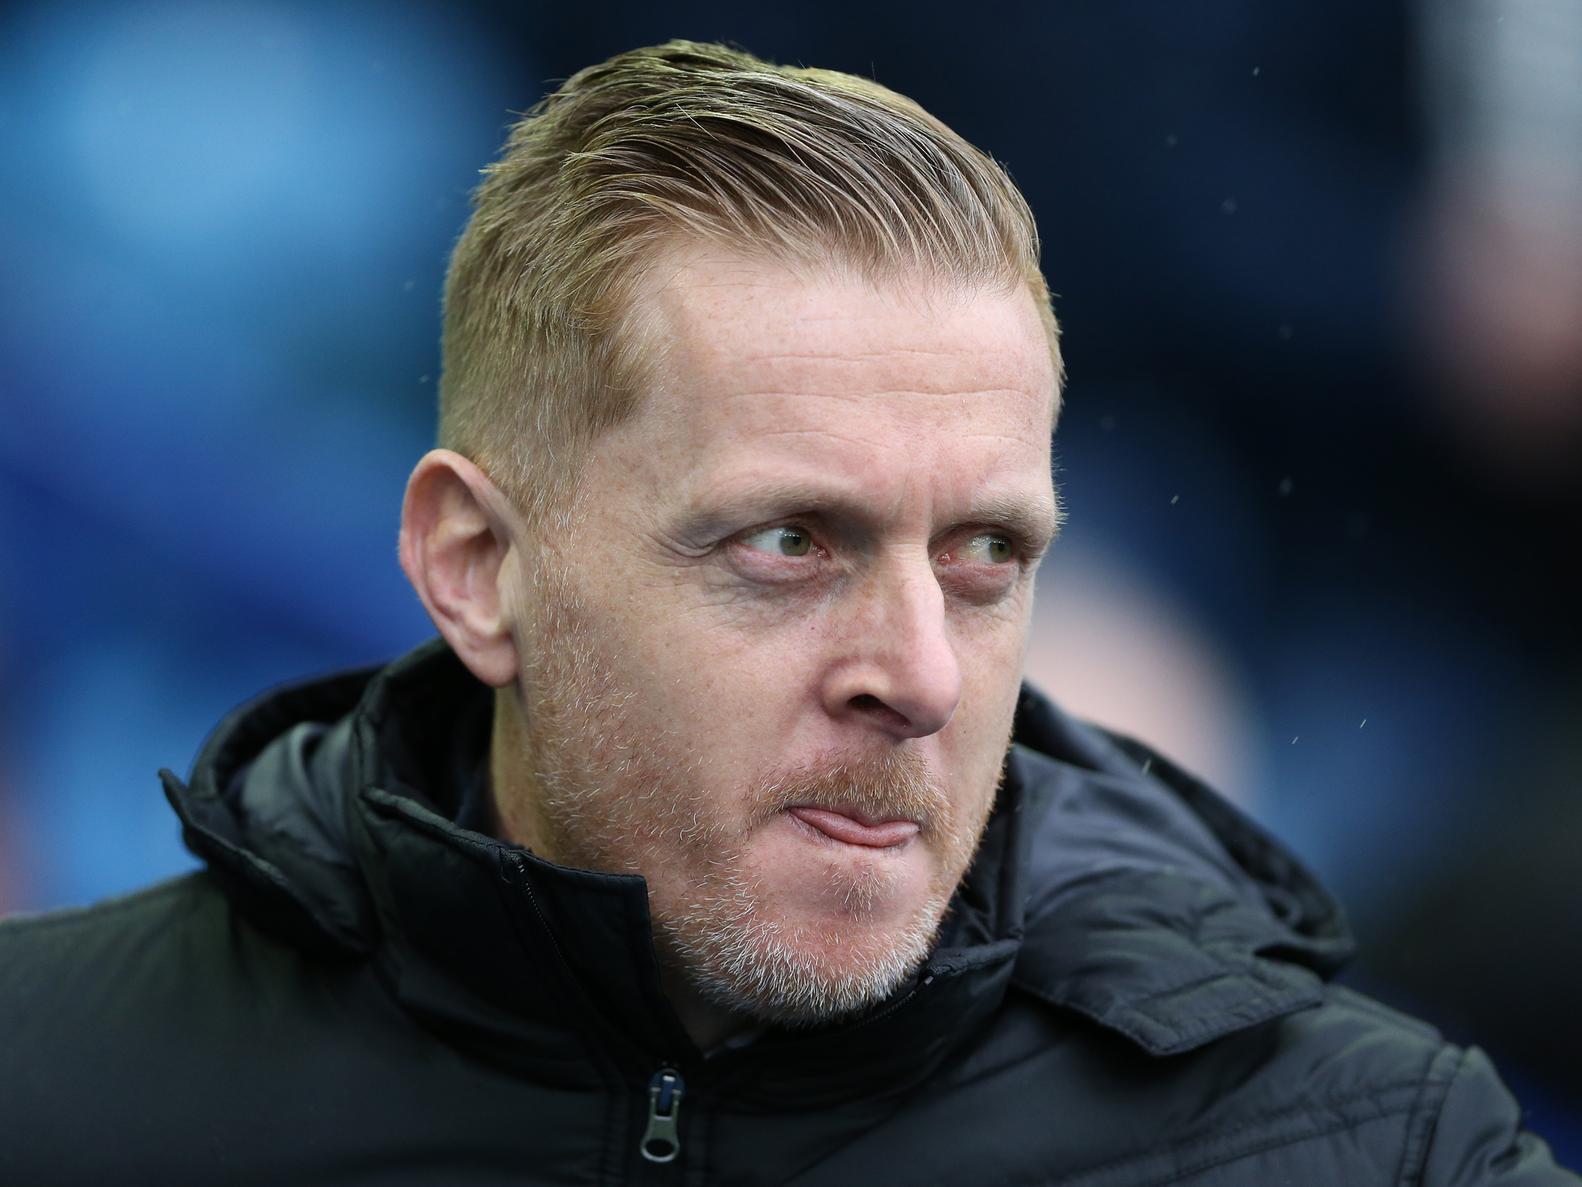 Sheffield Wednesday are in crisis mode, and at 1-0 down to Reading, the last thing Monk needed was a red card for Osaze Urhoghide. The full time score of 3-0 leaves the Owls bottom of the form table.